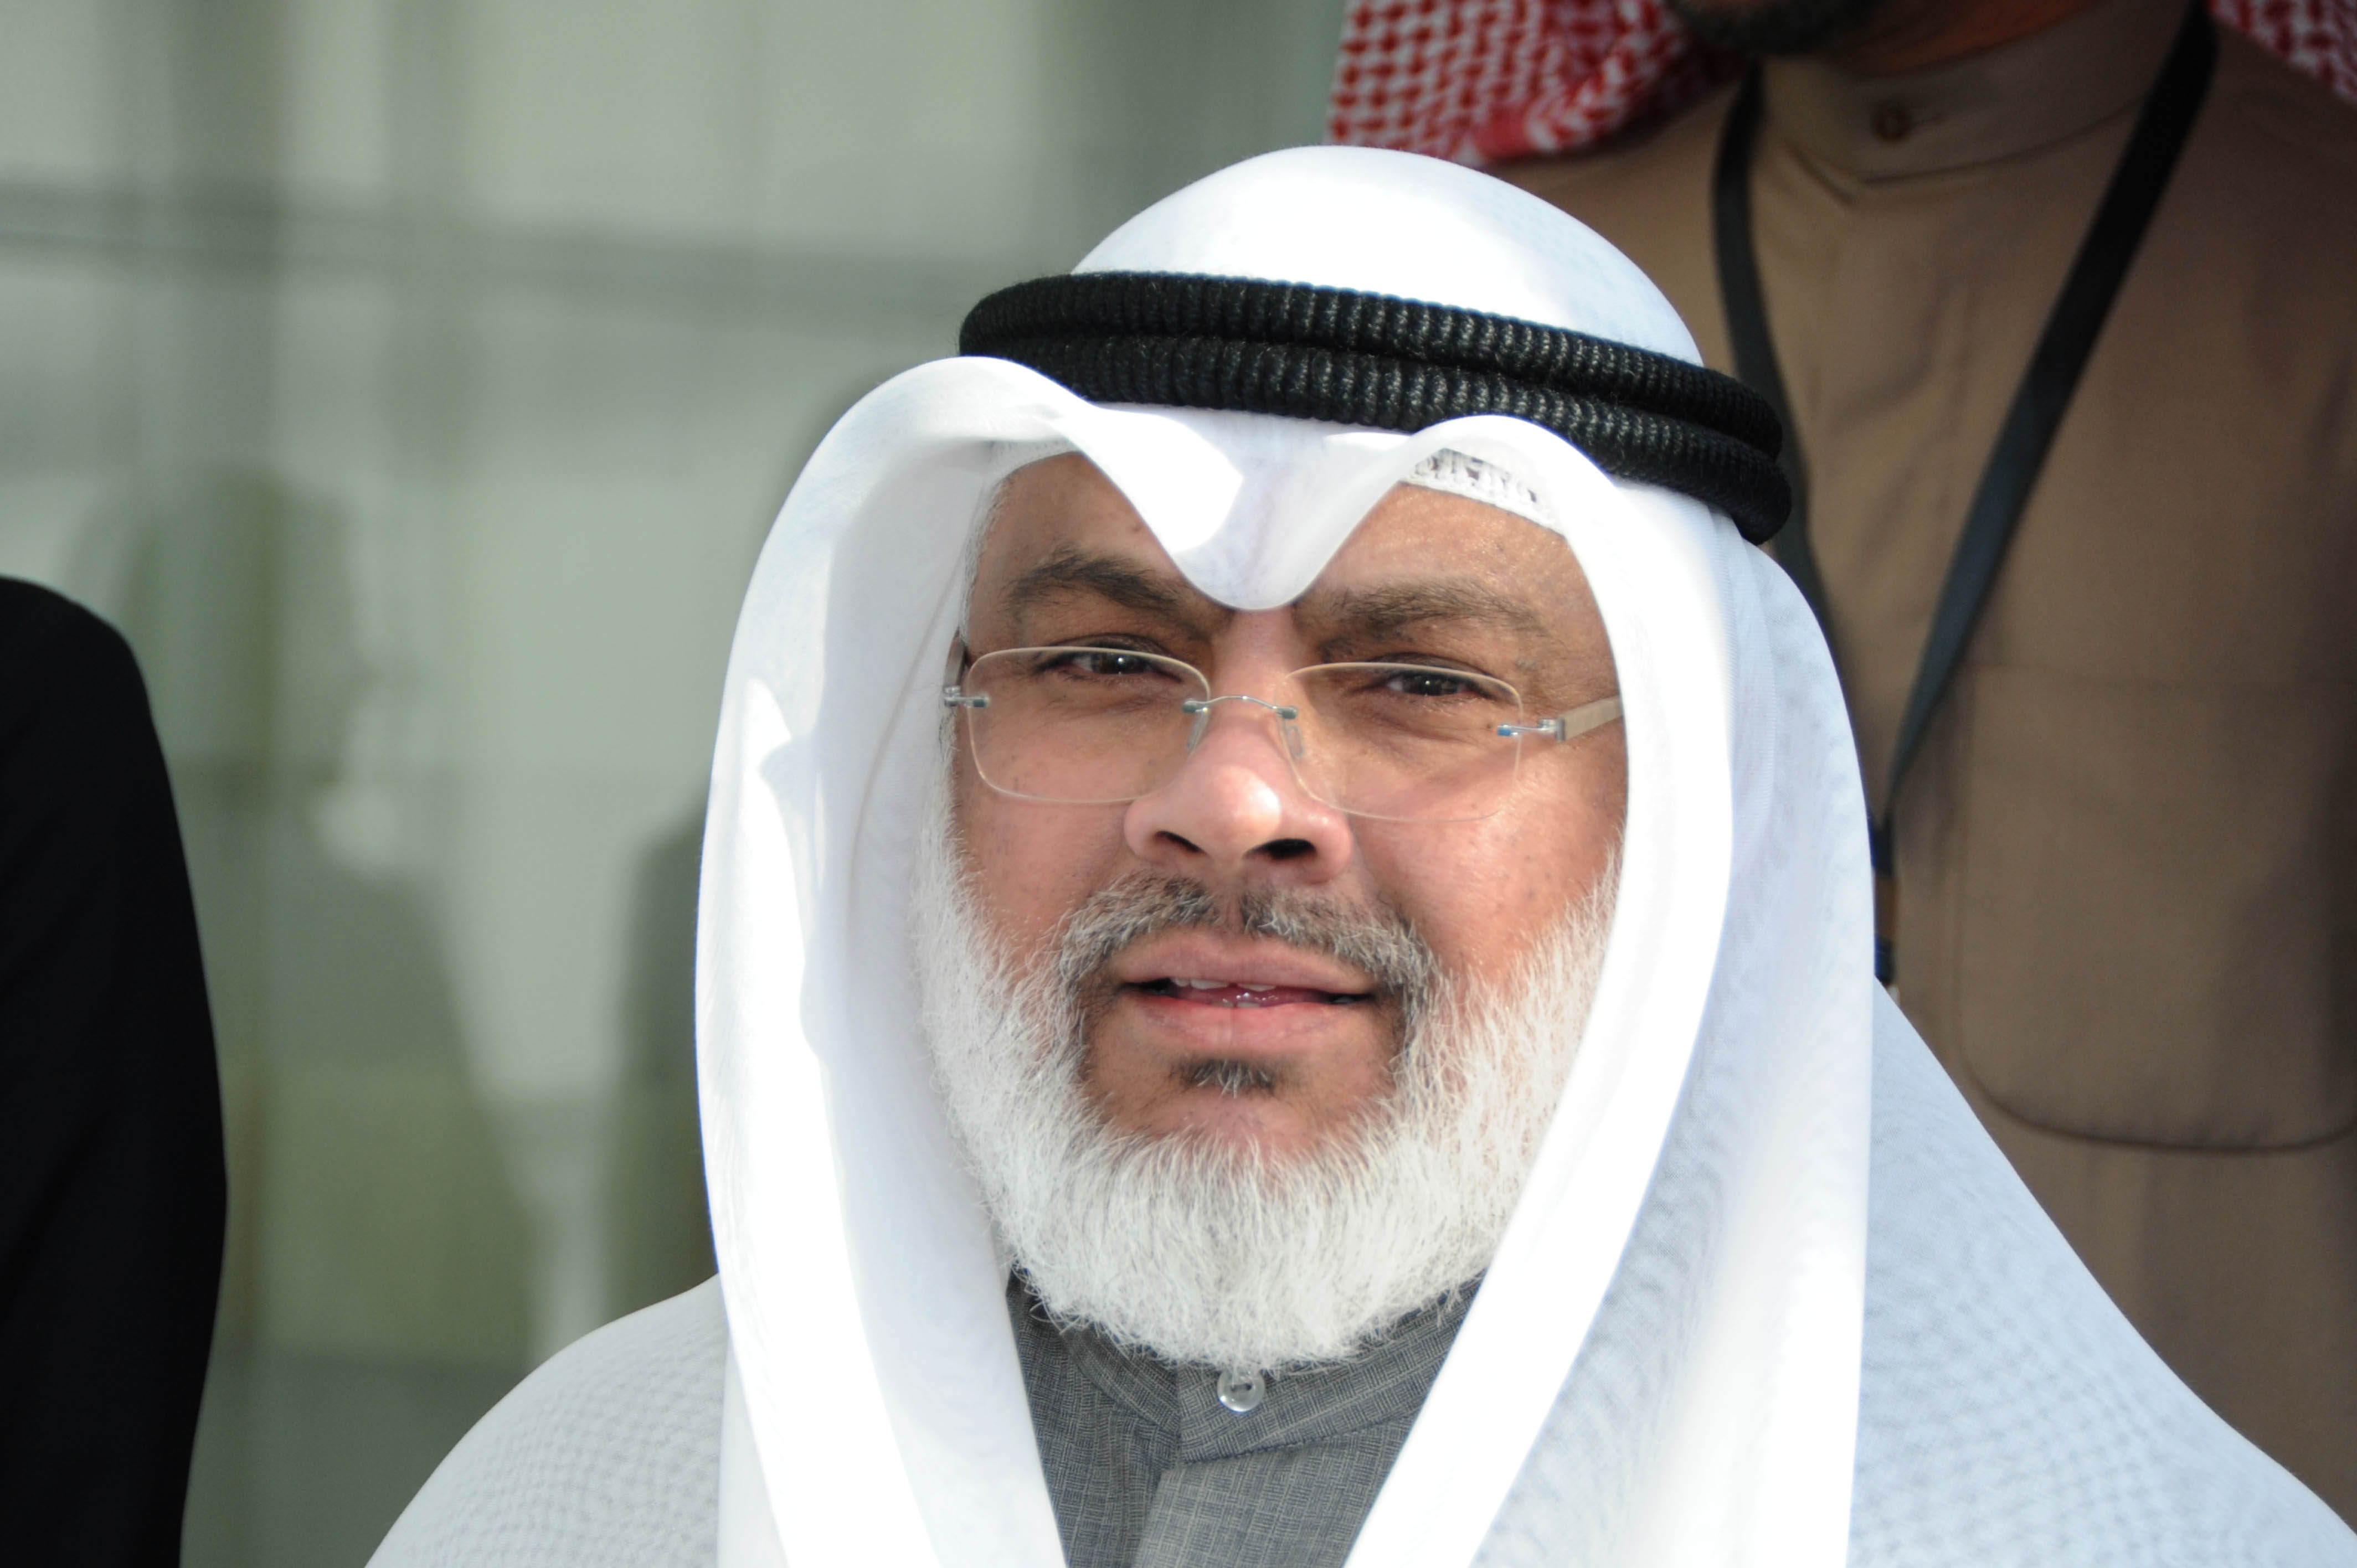 The acting chairman of Kuwait's State Audit Bureau Adel Al-Sarawi